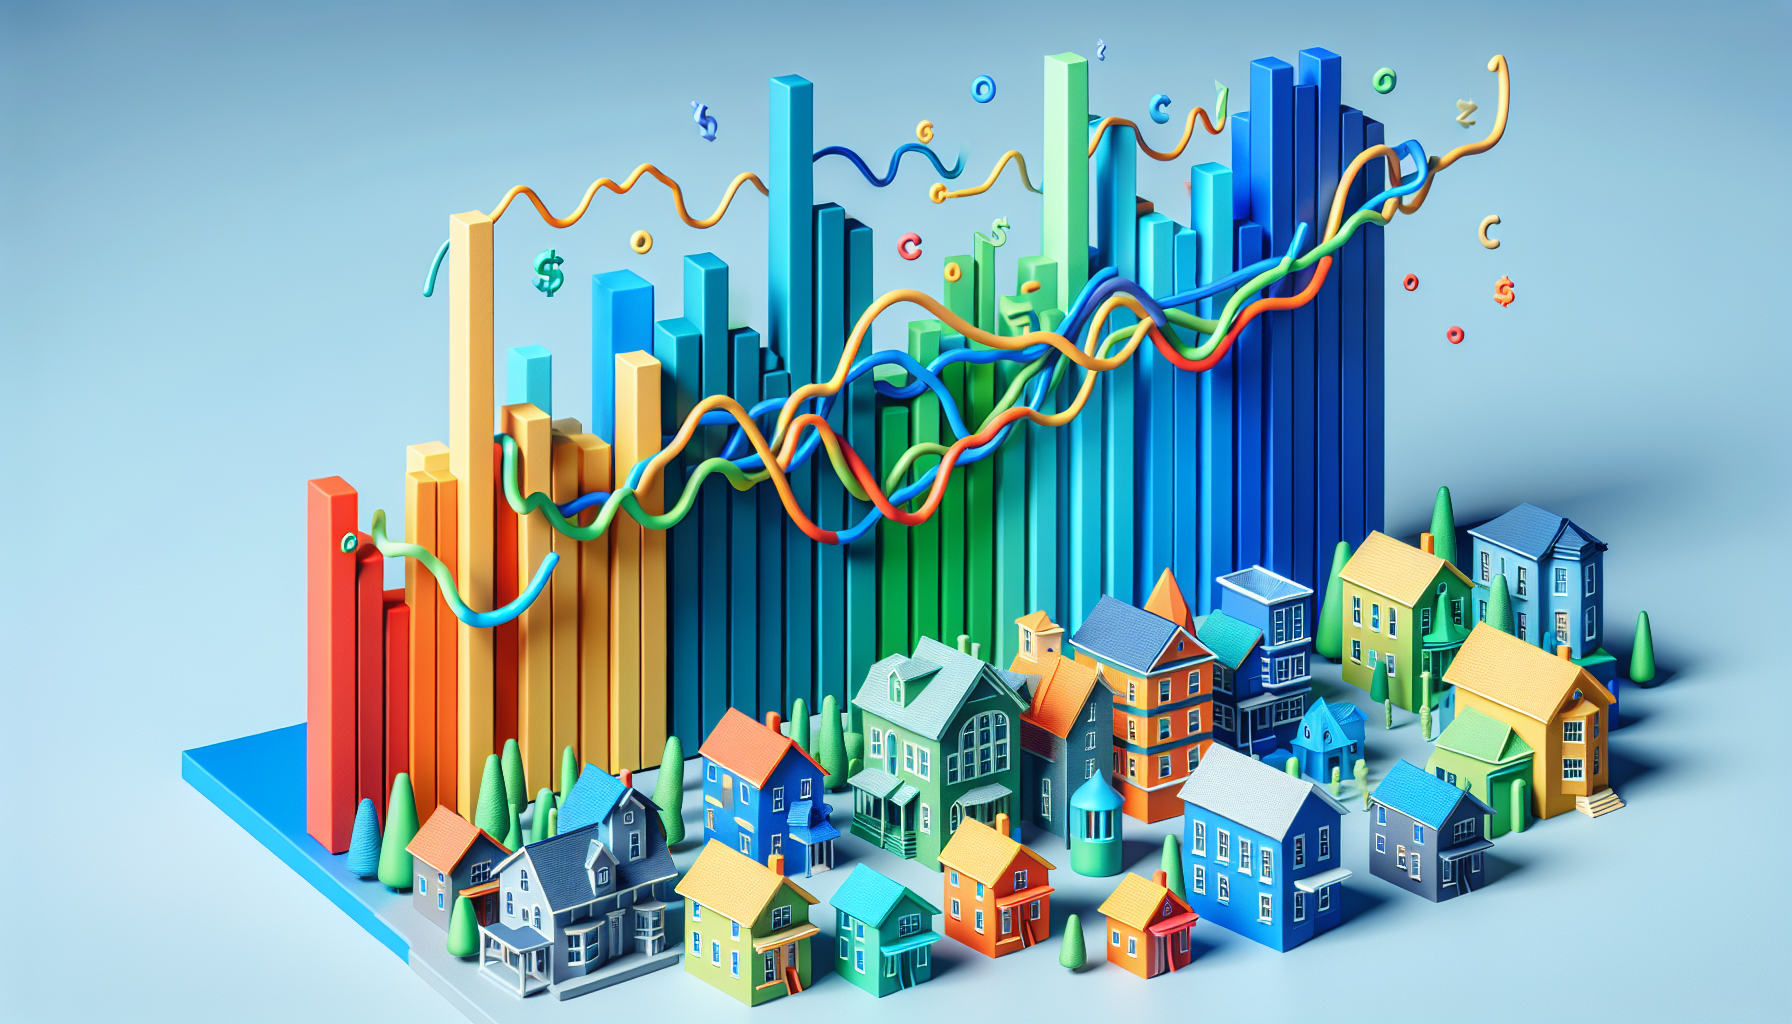 Real estate market trend chart with Kansas City data